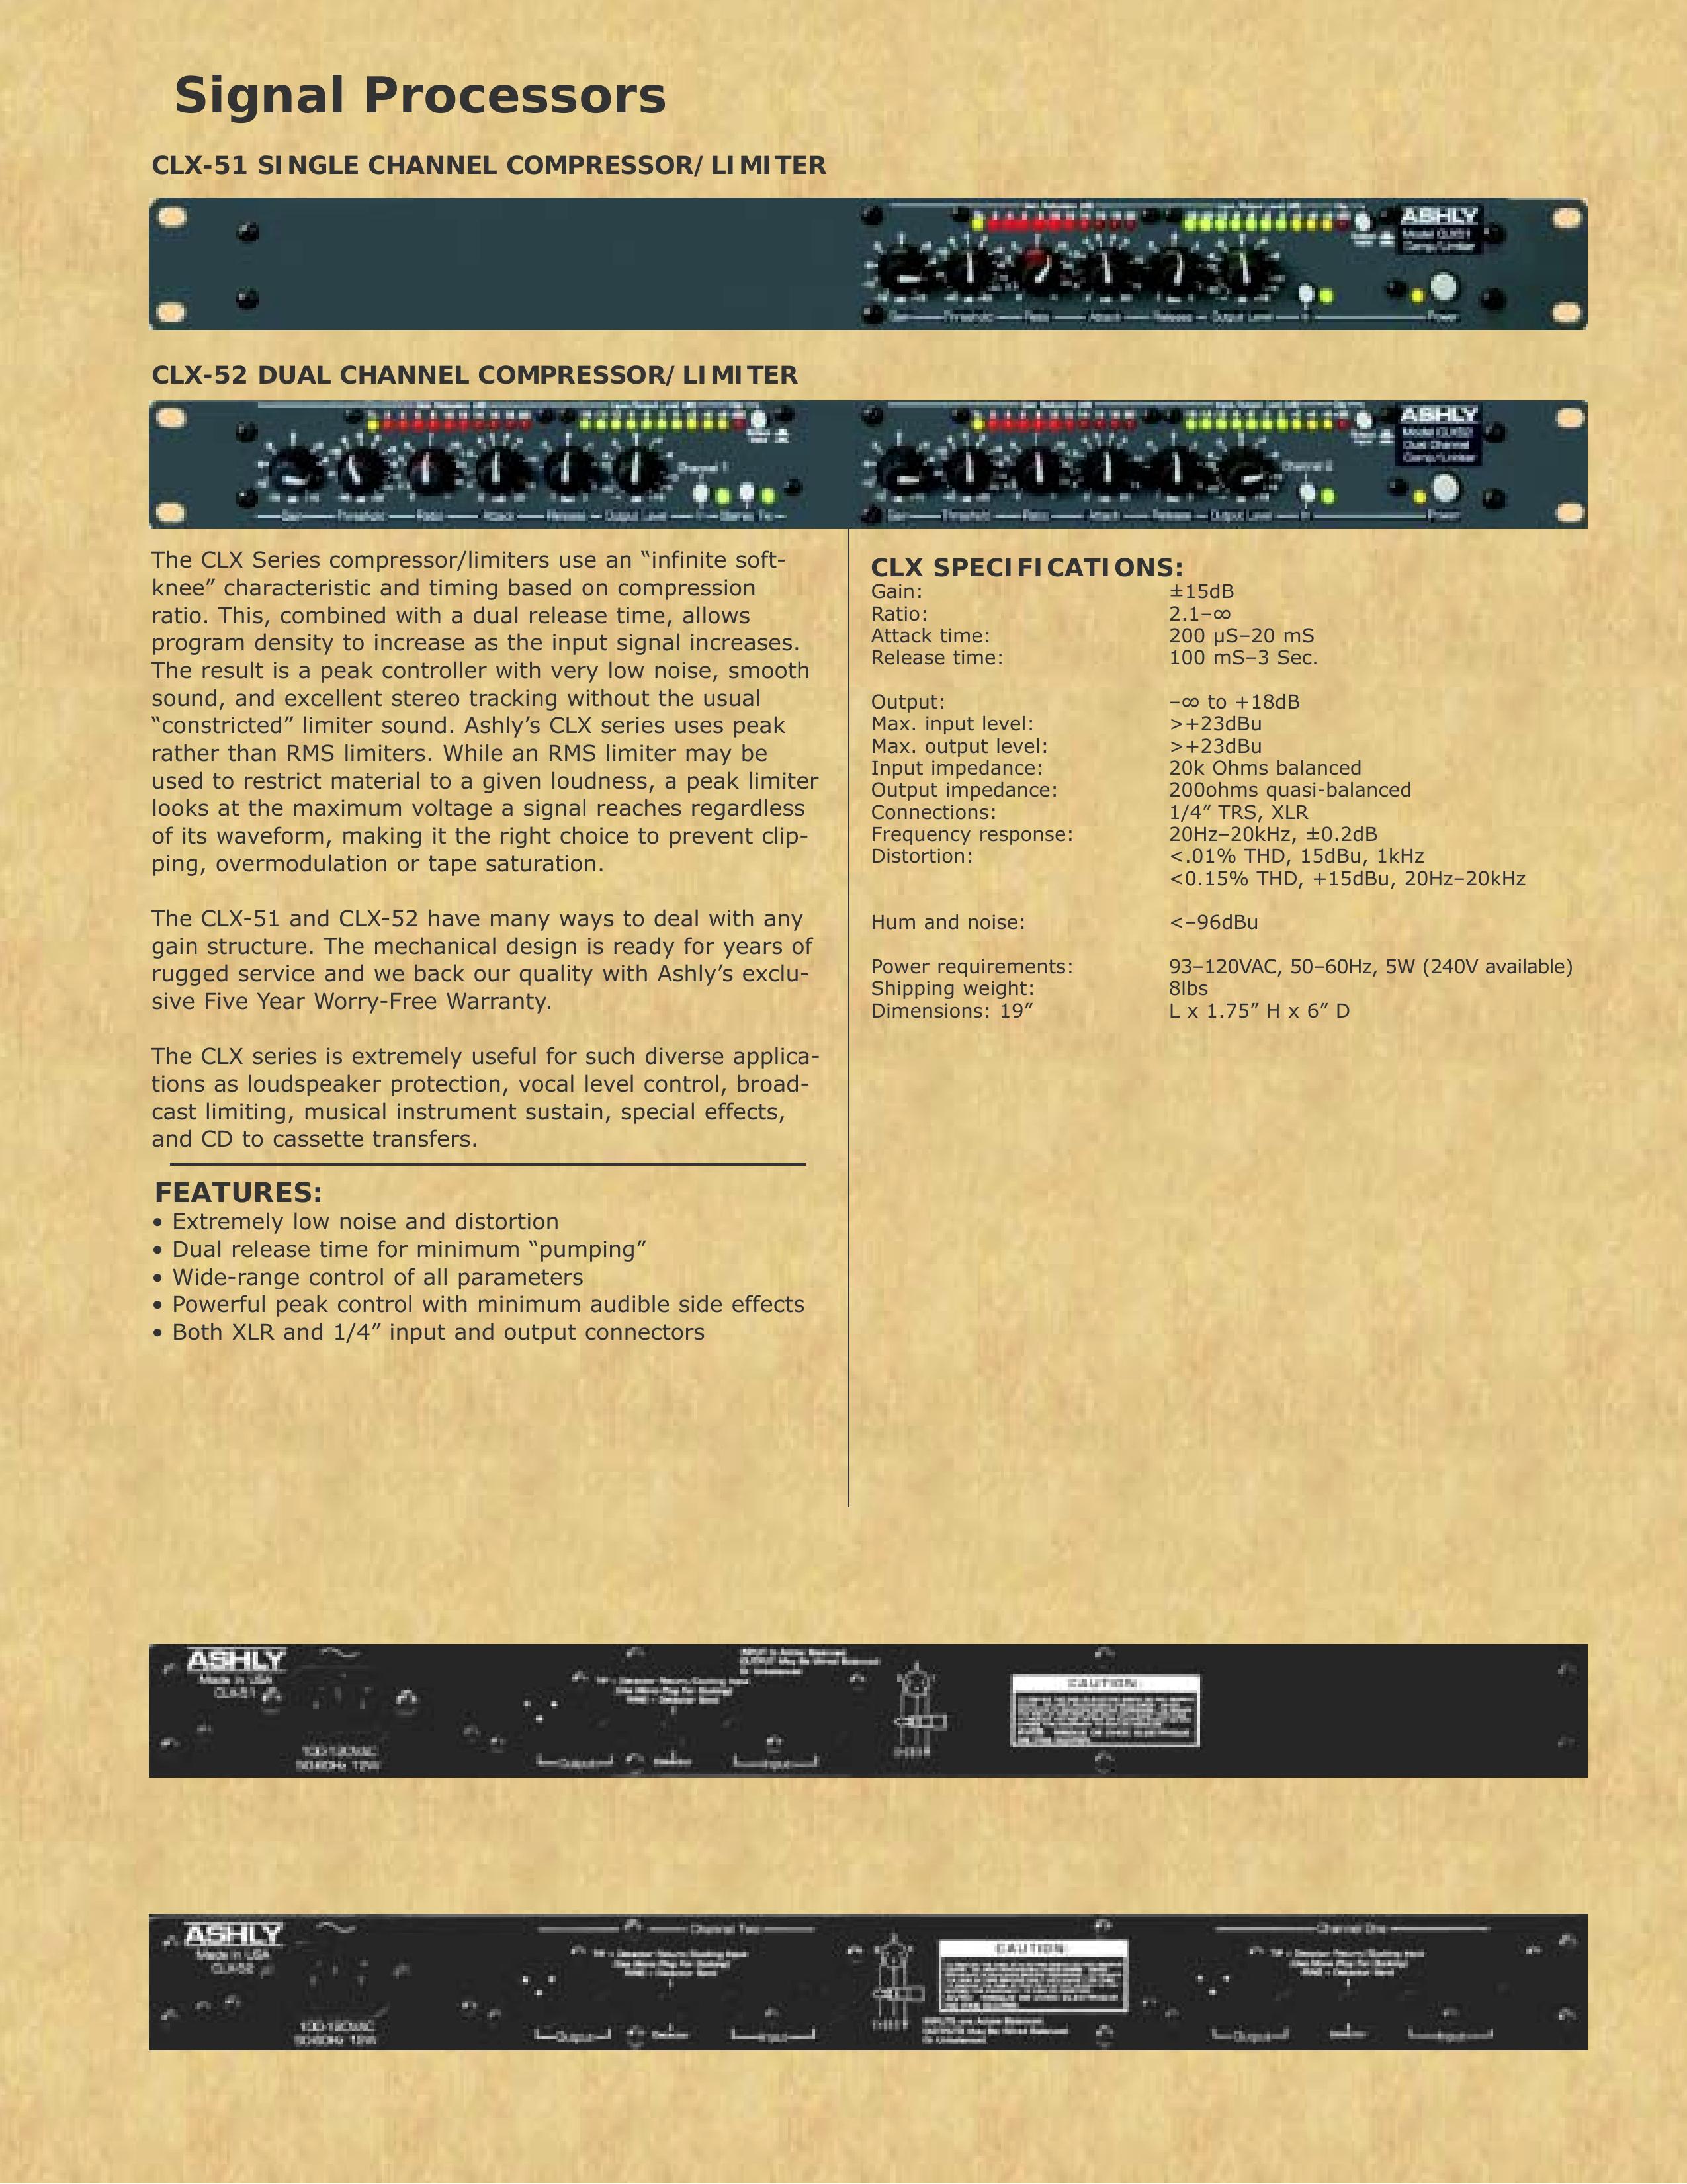 Ashly CLX-51 Music Mixer User Manual (Page 1)